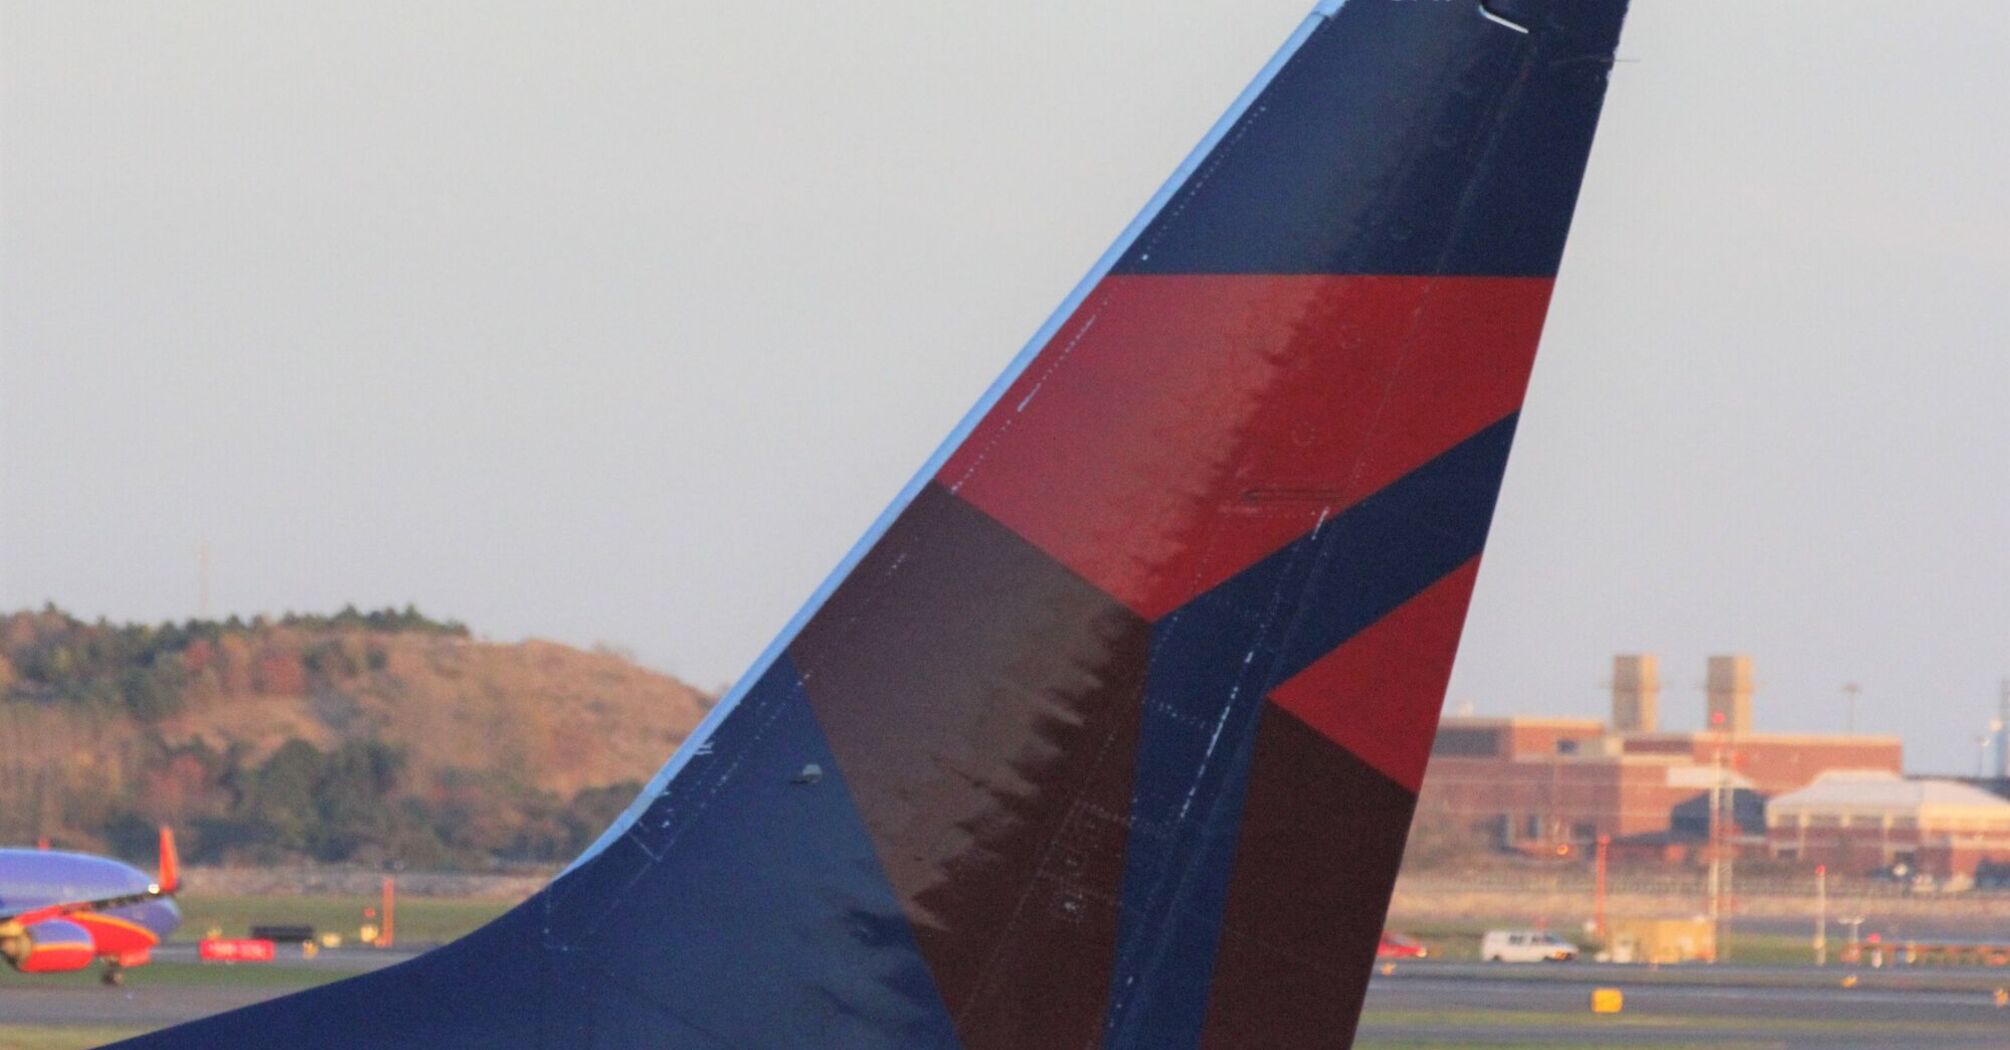 Delta Air Lines plane tail